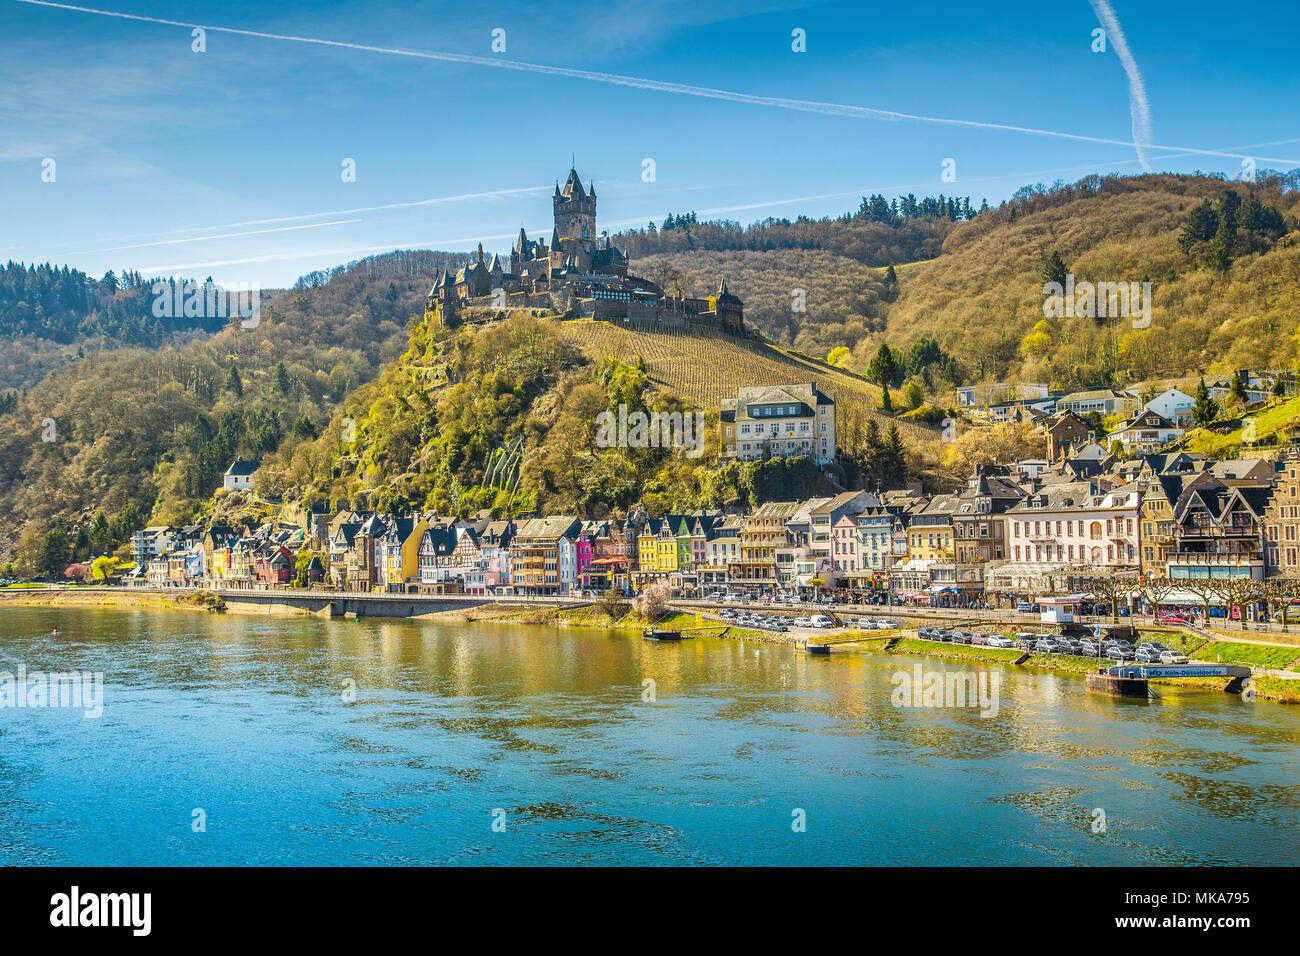 Beautiful view of the historic town of Cochem with famous Reichsburg castle on top of a hill and scenic Moselle river on a sunny day with blue sky and Stock Photo